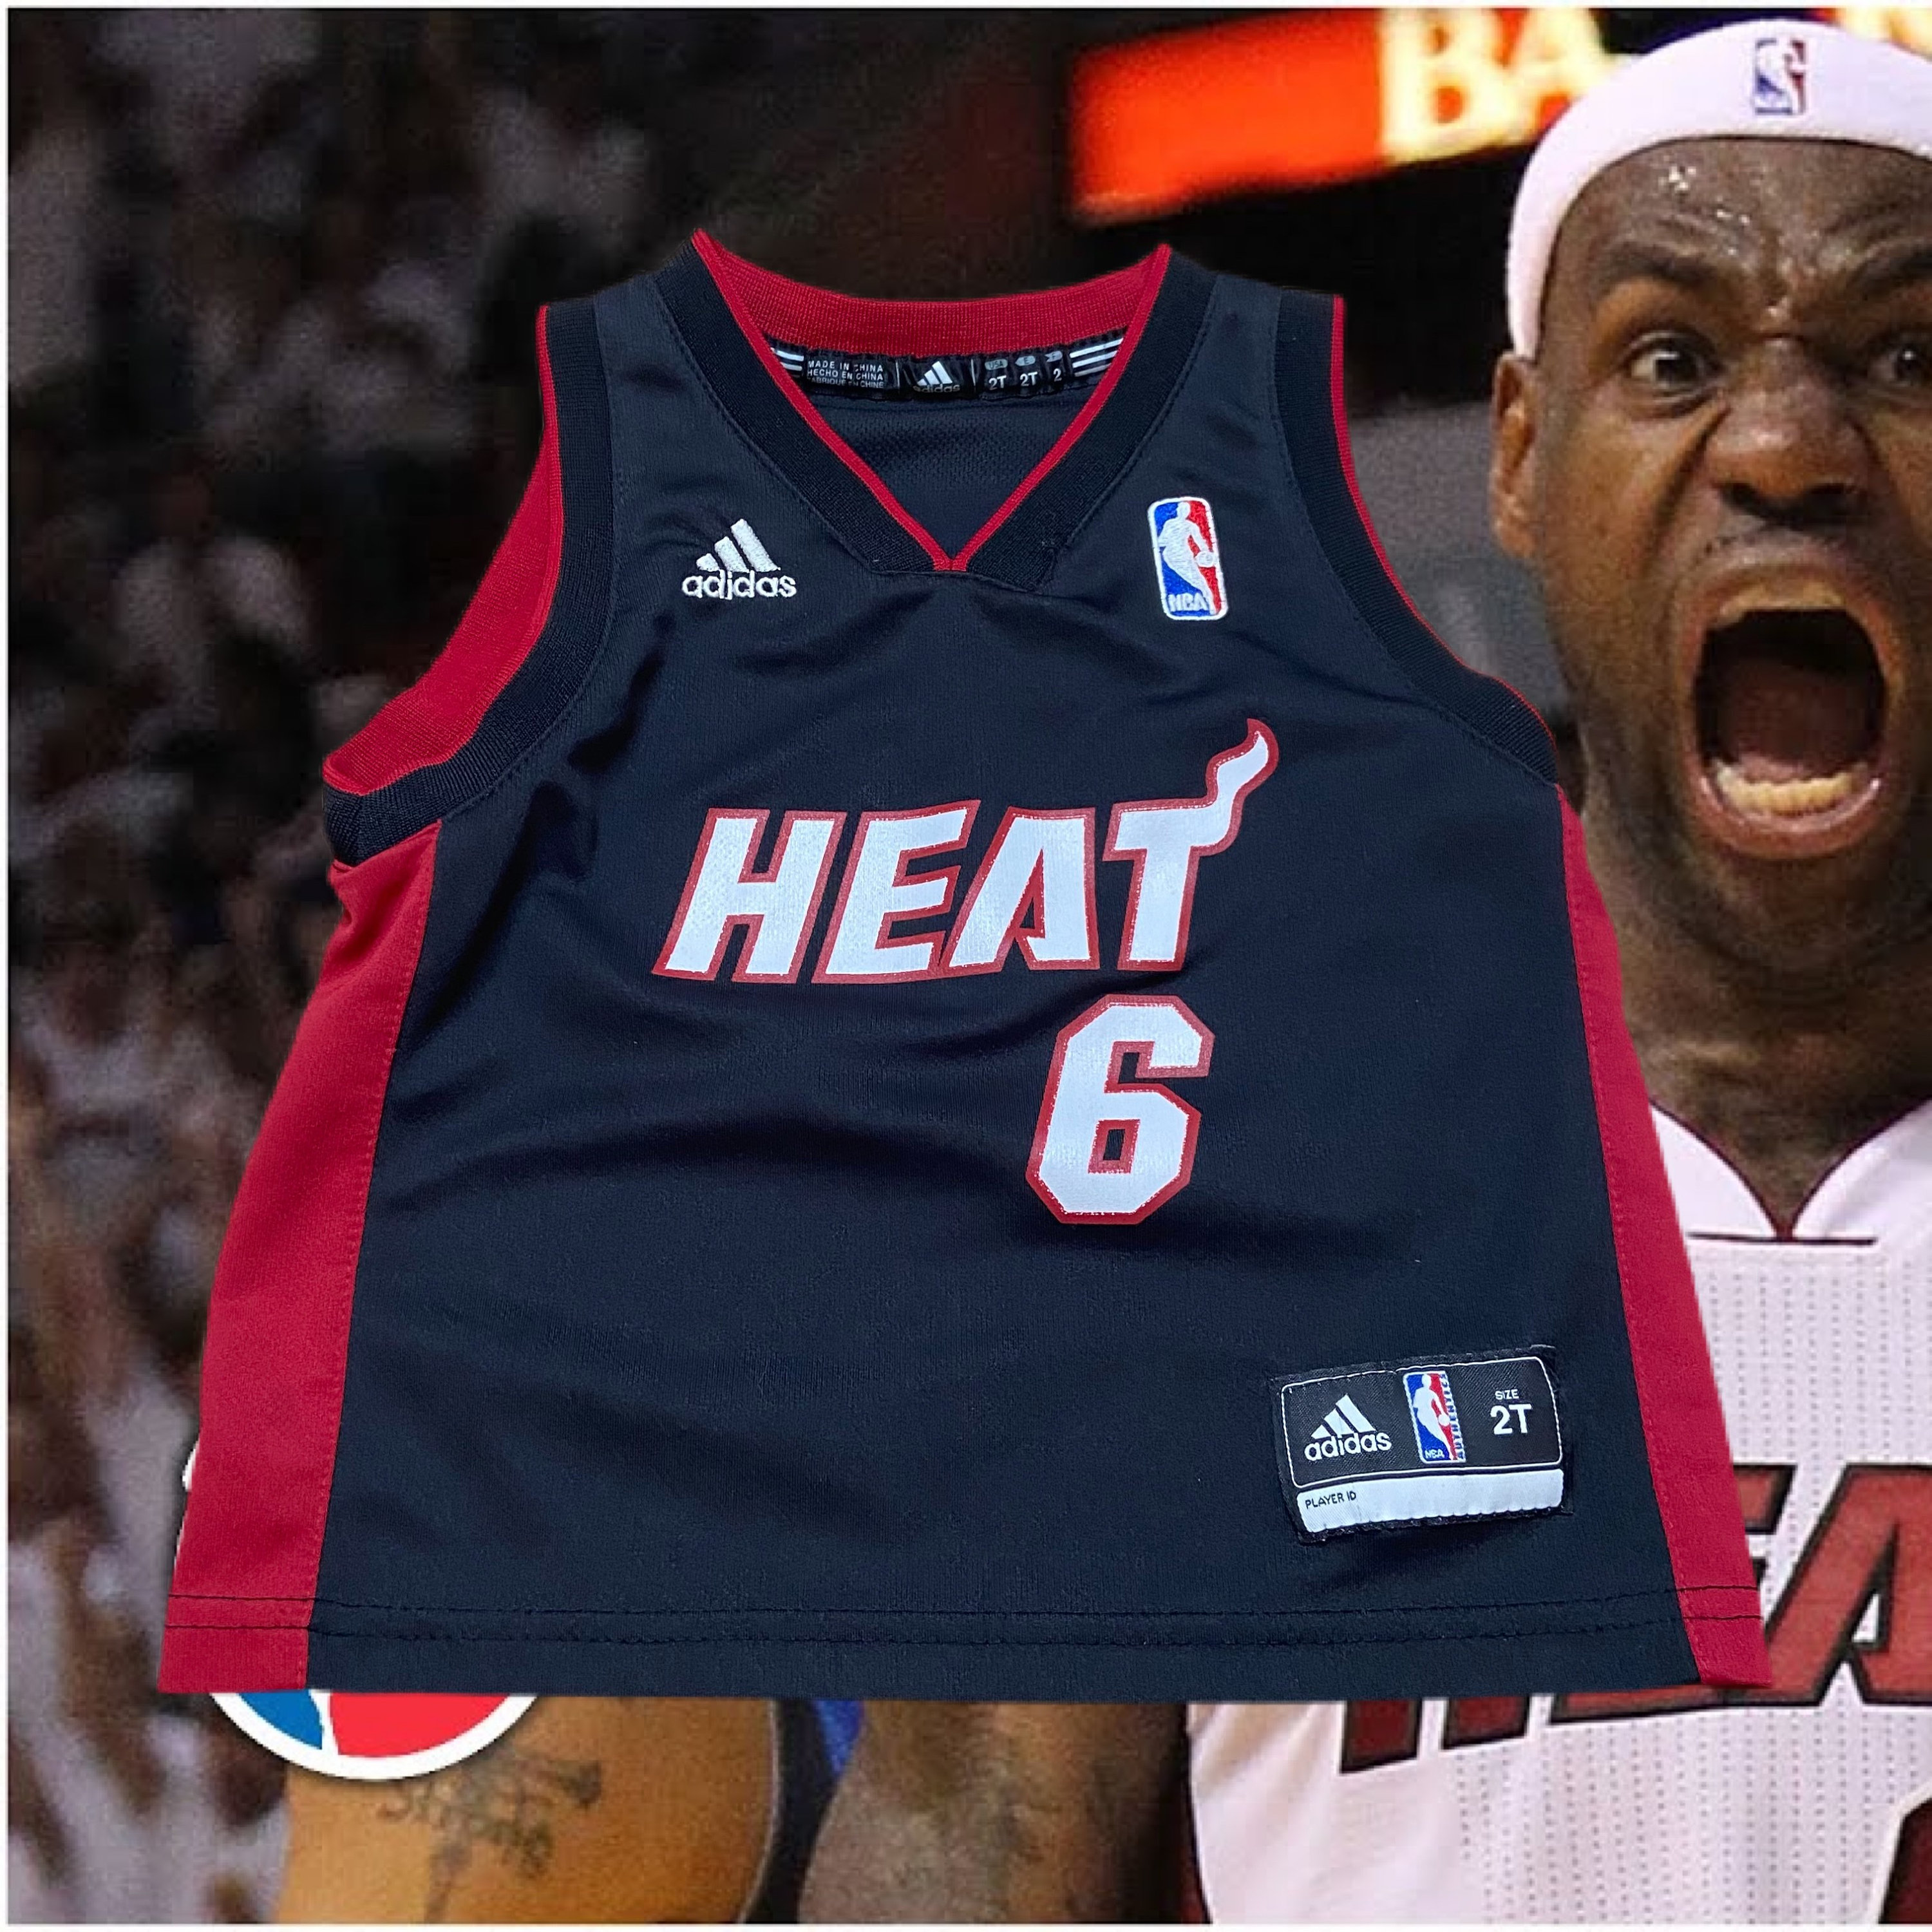 As-is Kids Size Lebron James Stitched Miami Heat Jersey